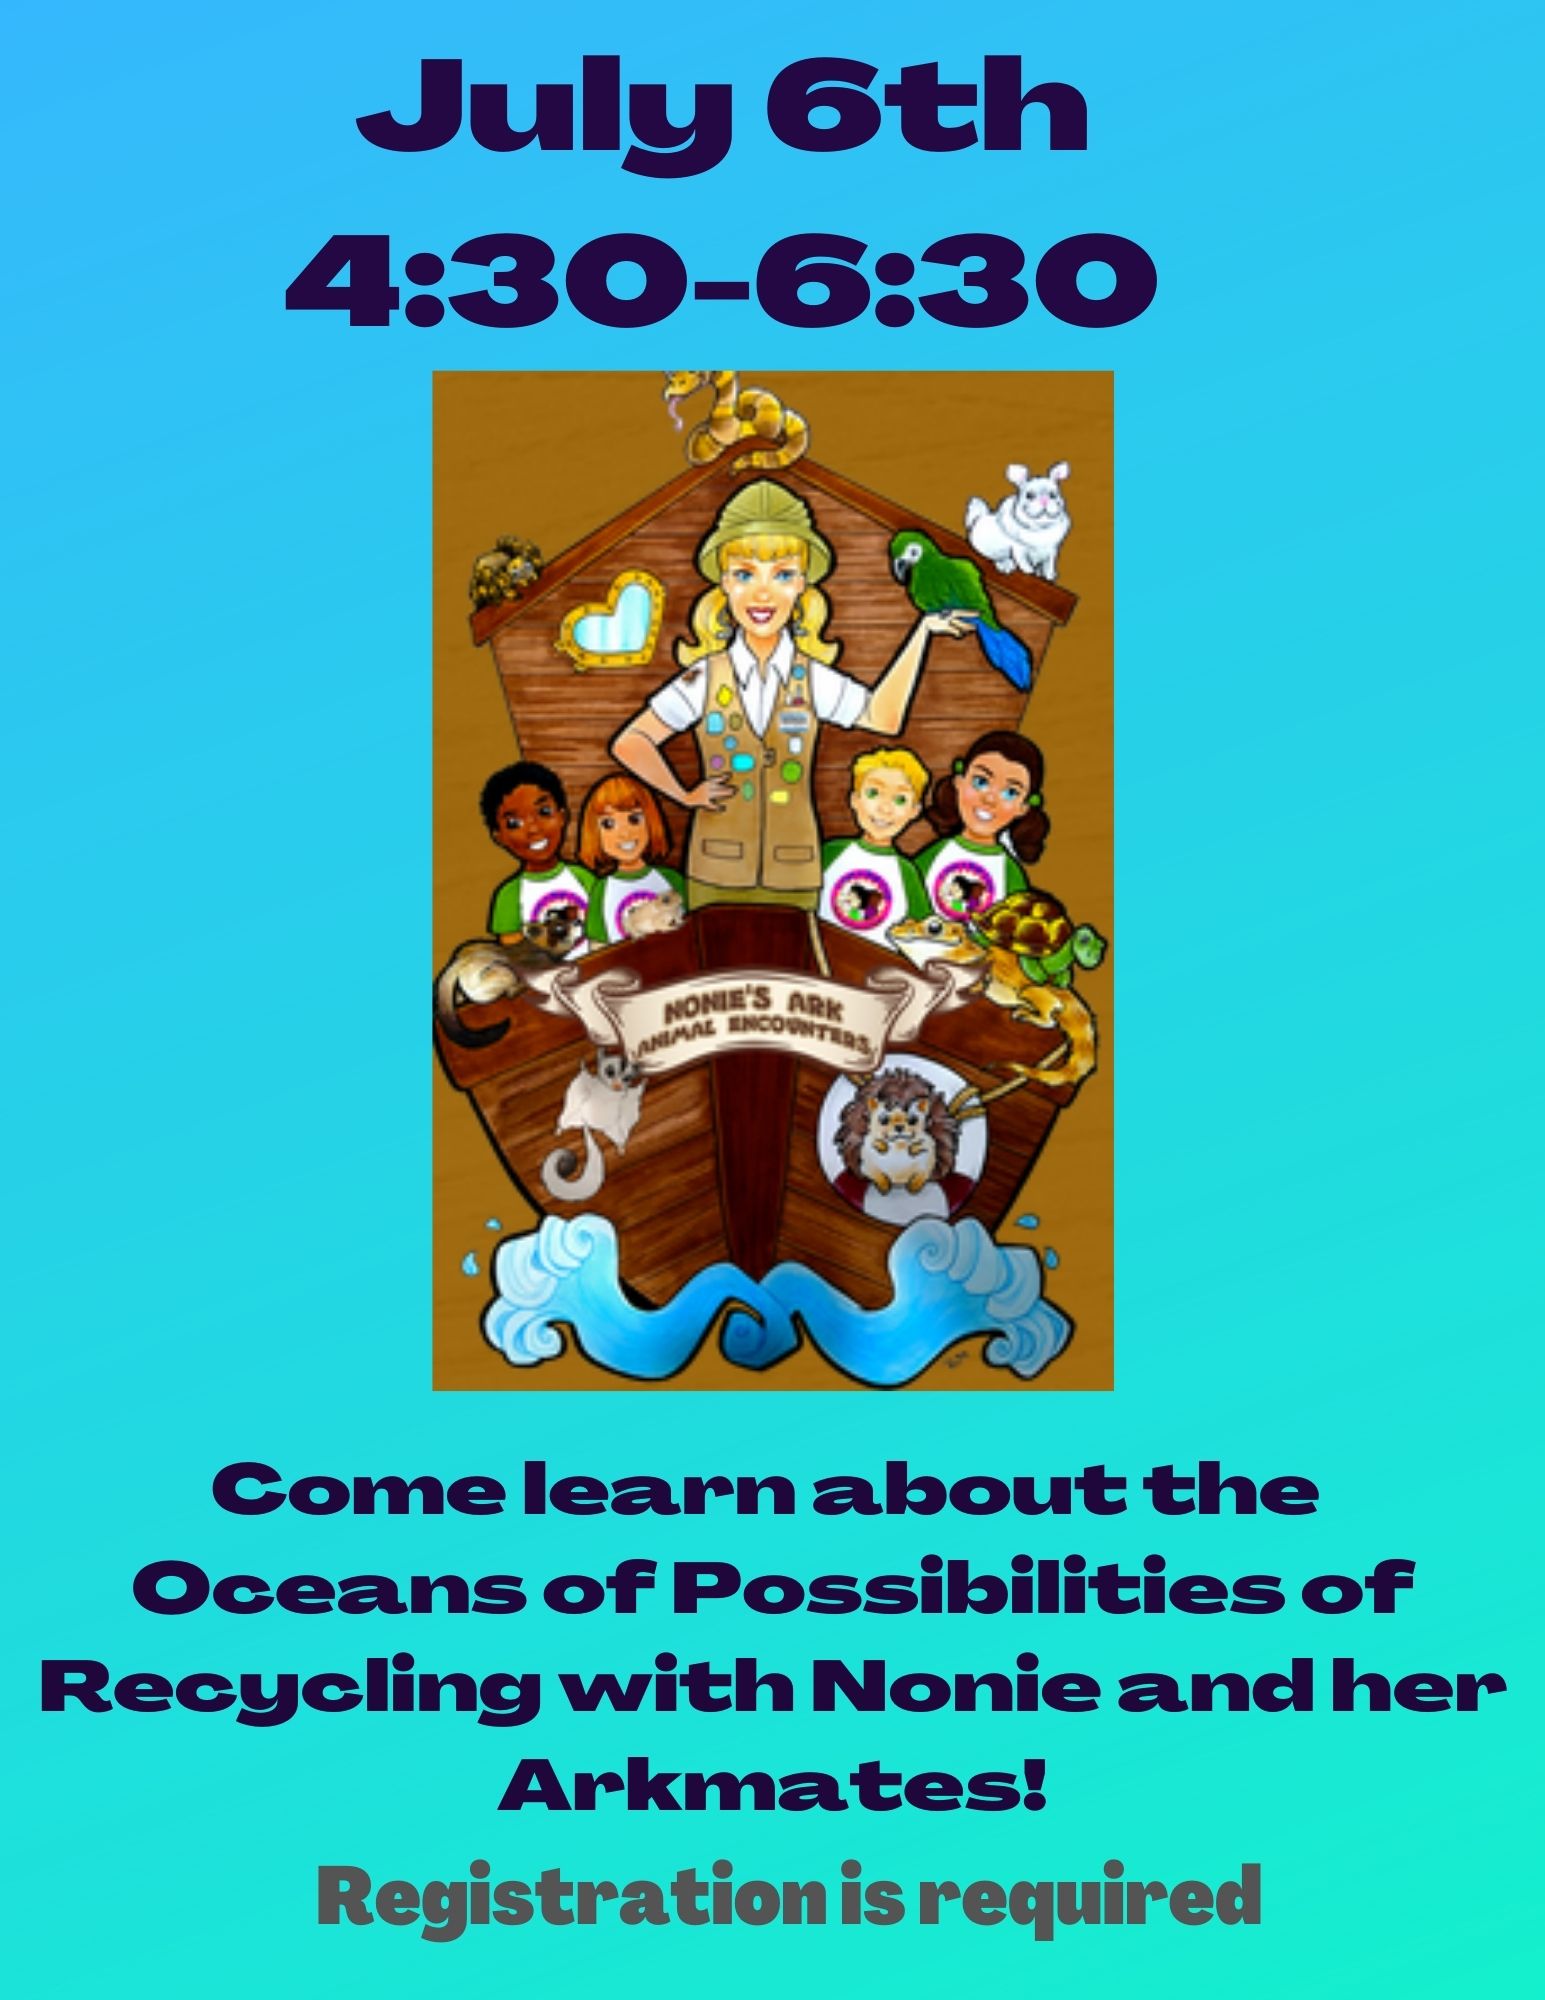 Nonie's ark with animals. July 6, 4:30-5:30